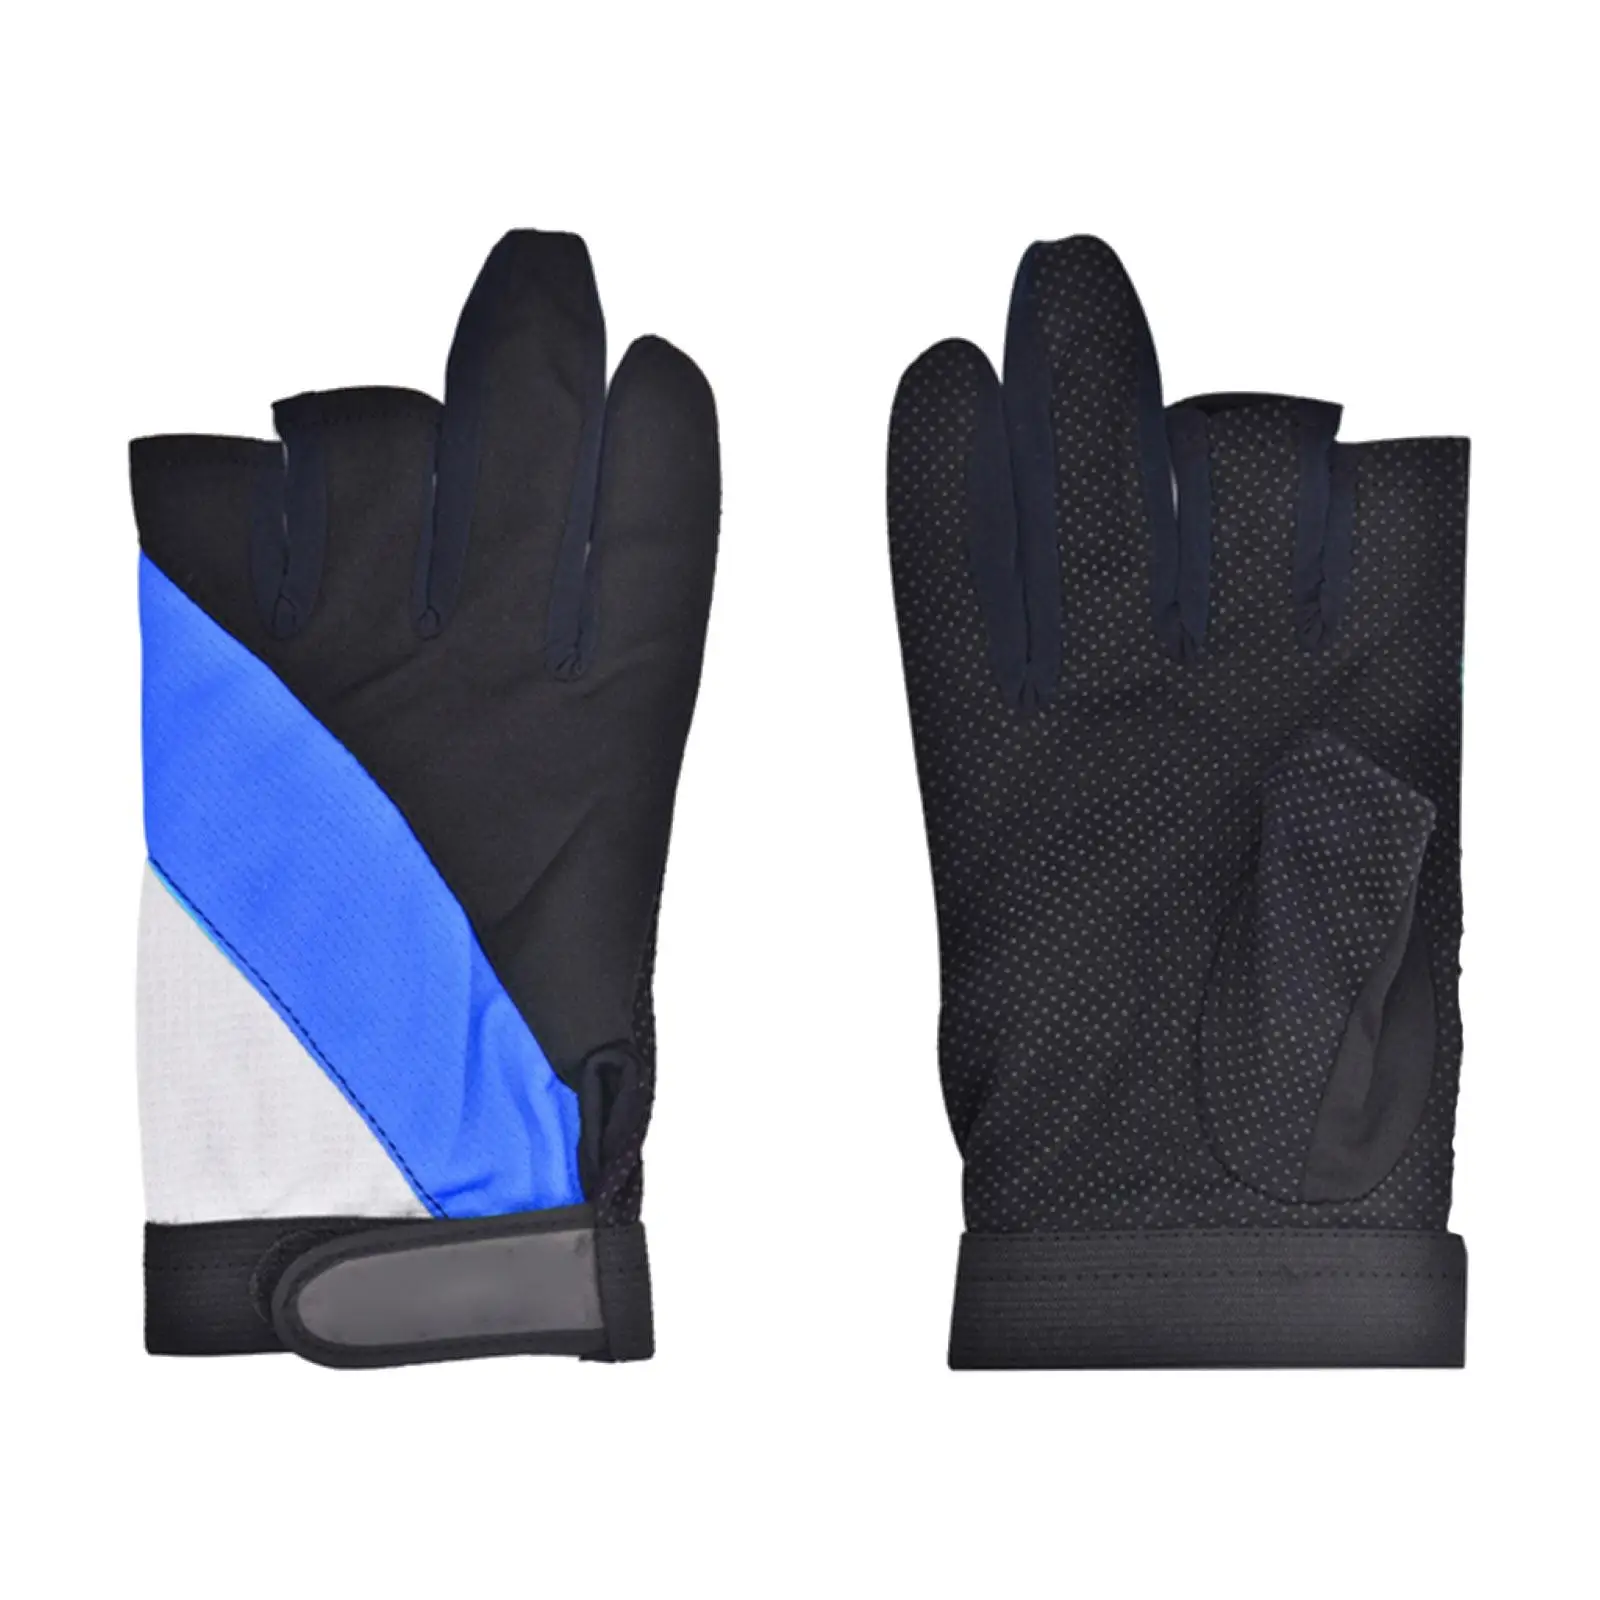 3 Cut Fingers Gloves Finger Protector Gloves for Cycling Outdoor Sports